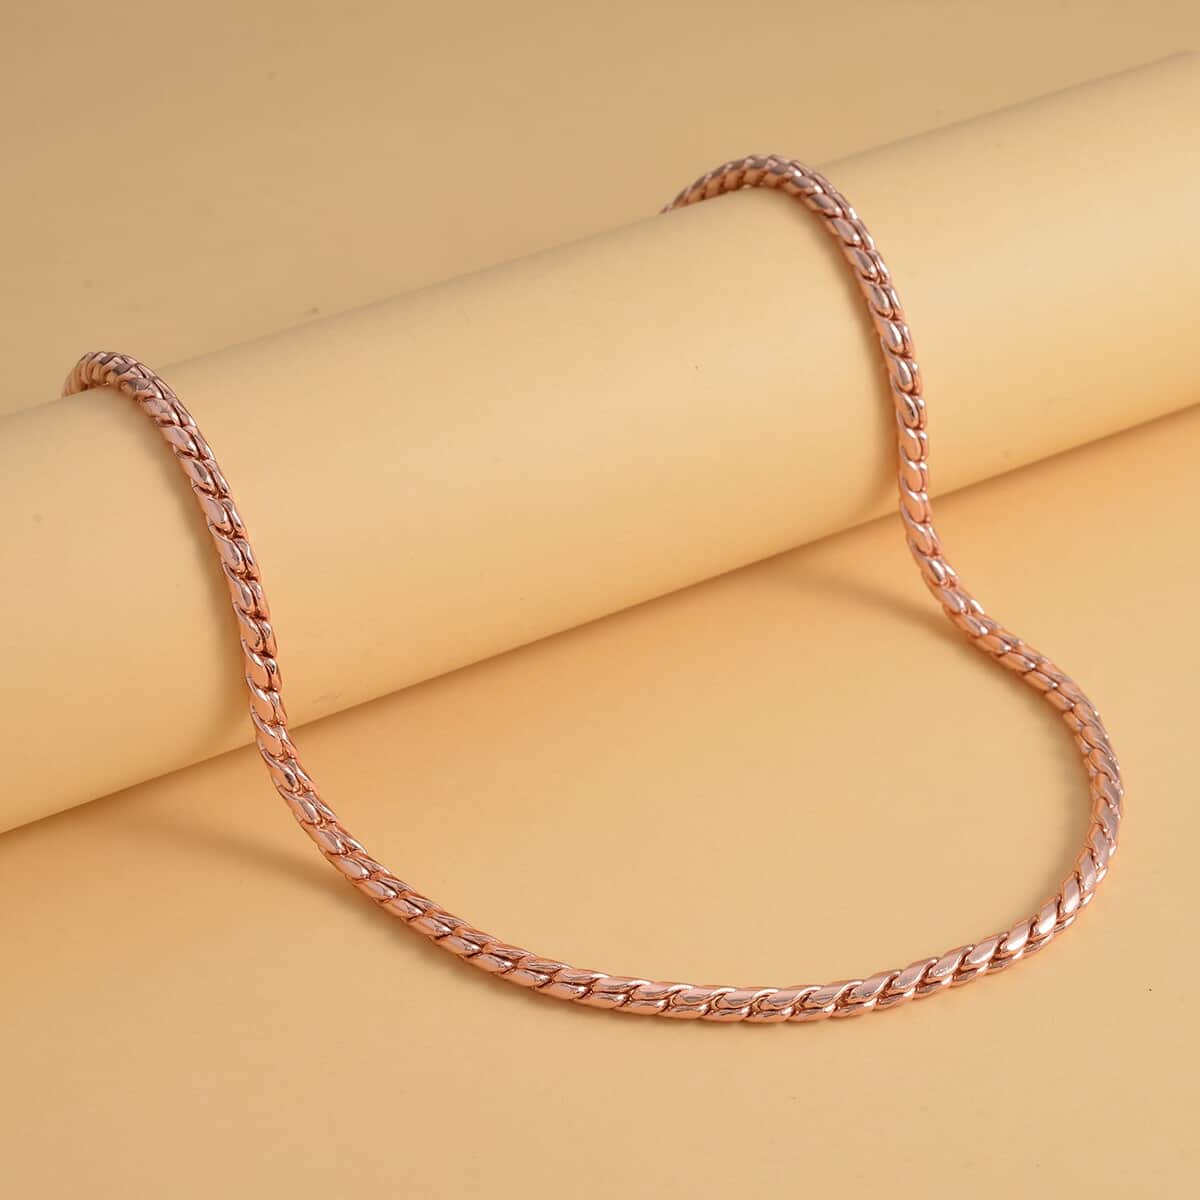 Roller Chain Necklace (22-24 Inches) in ION Plated RG Stainless Steel , Tarnish-Free, Waterproof, Sweat Proof Jewelry image number 1